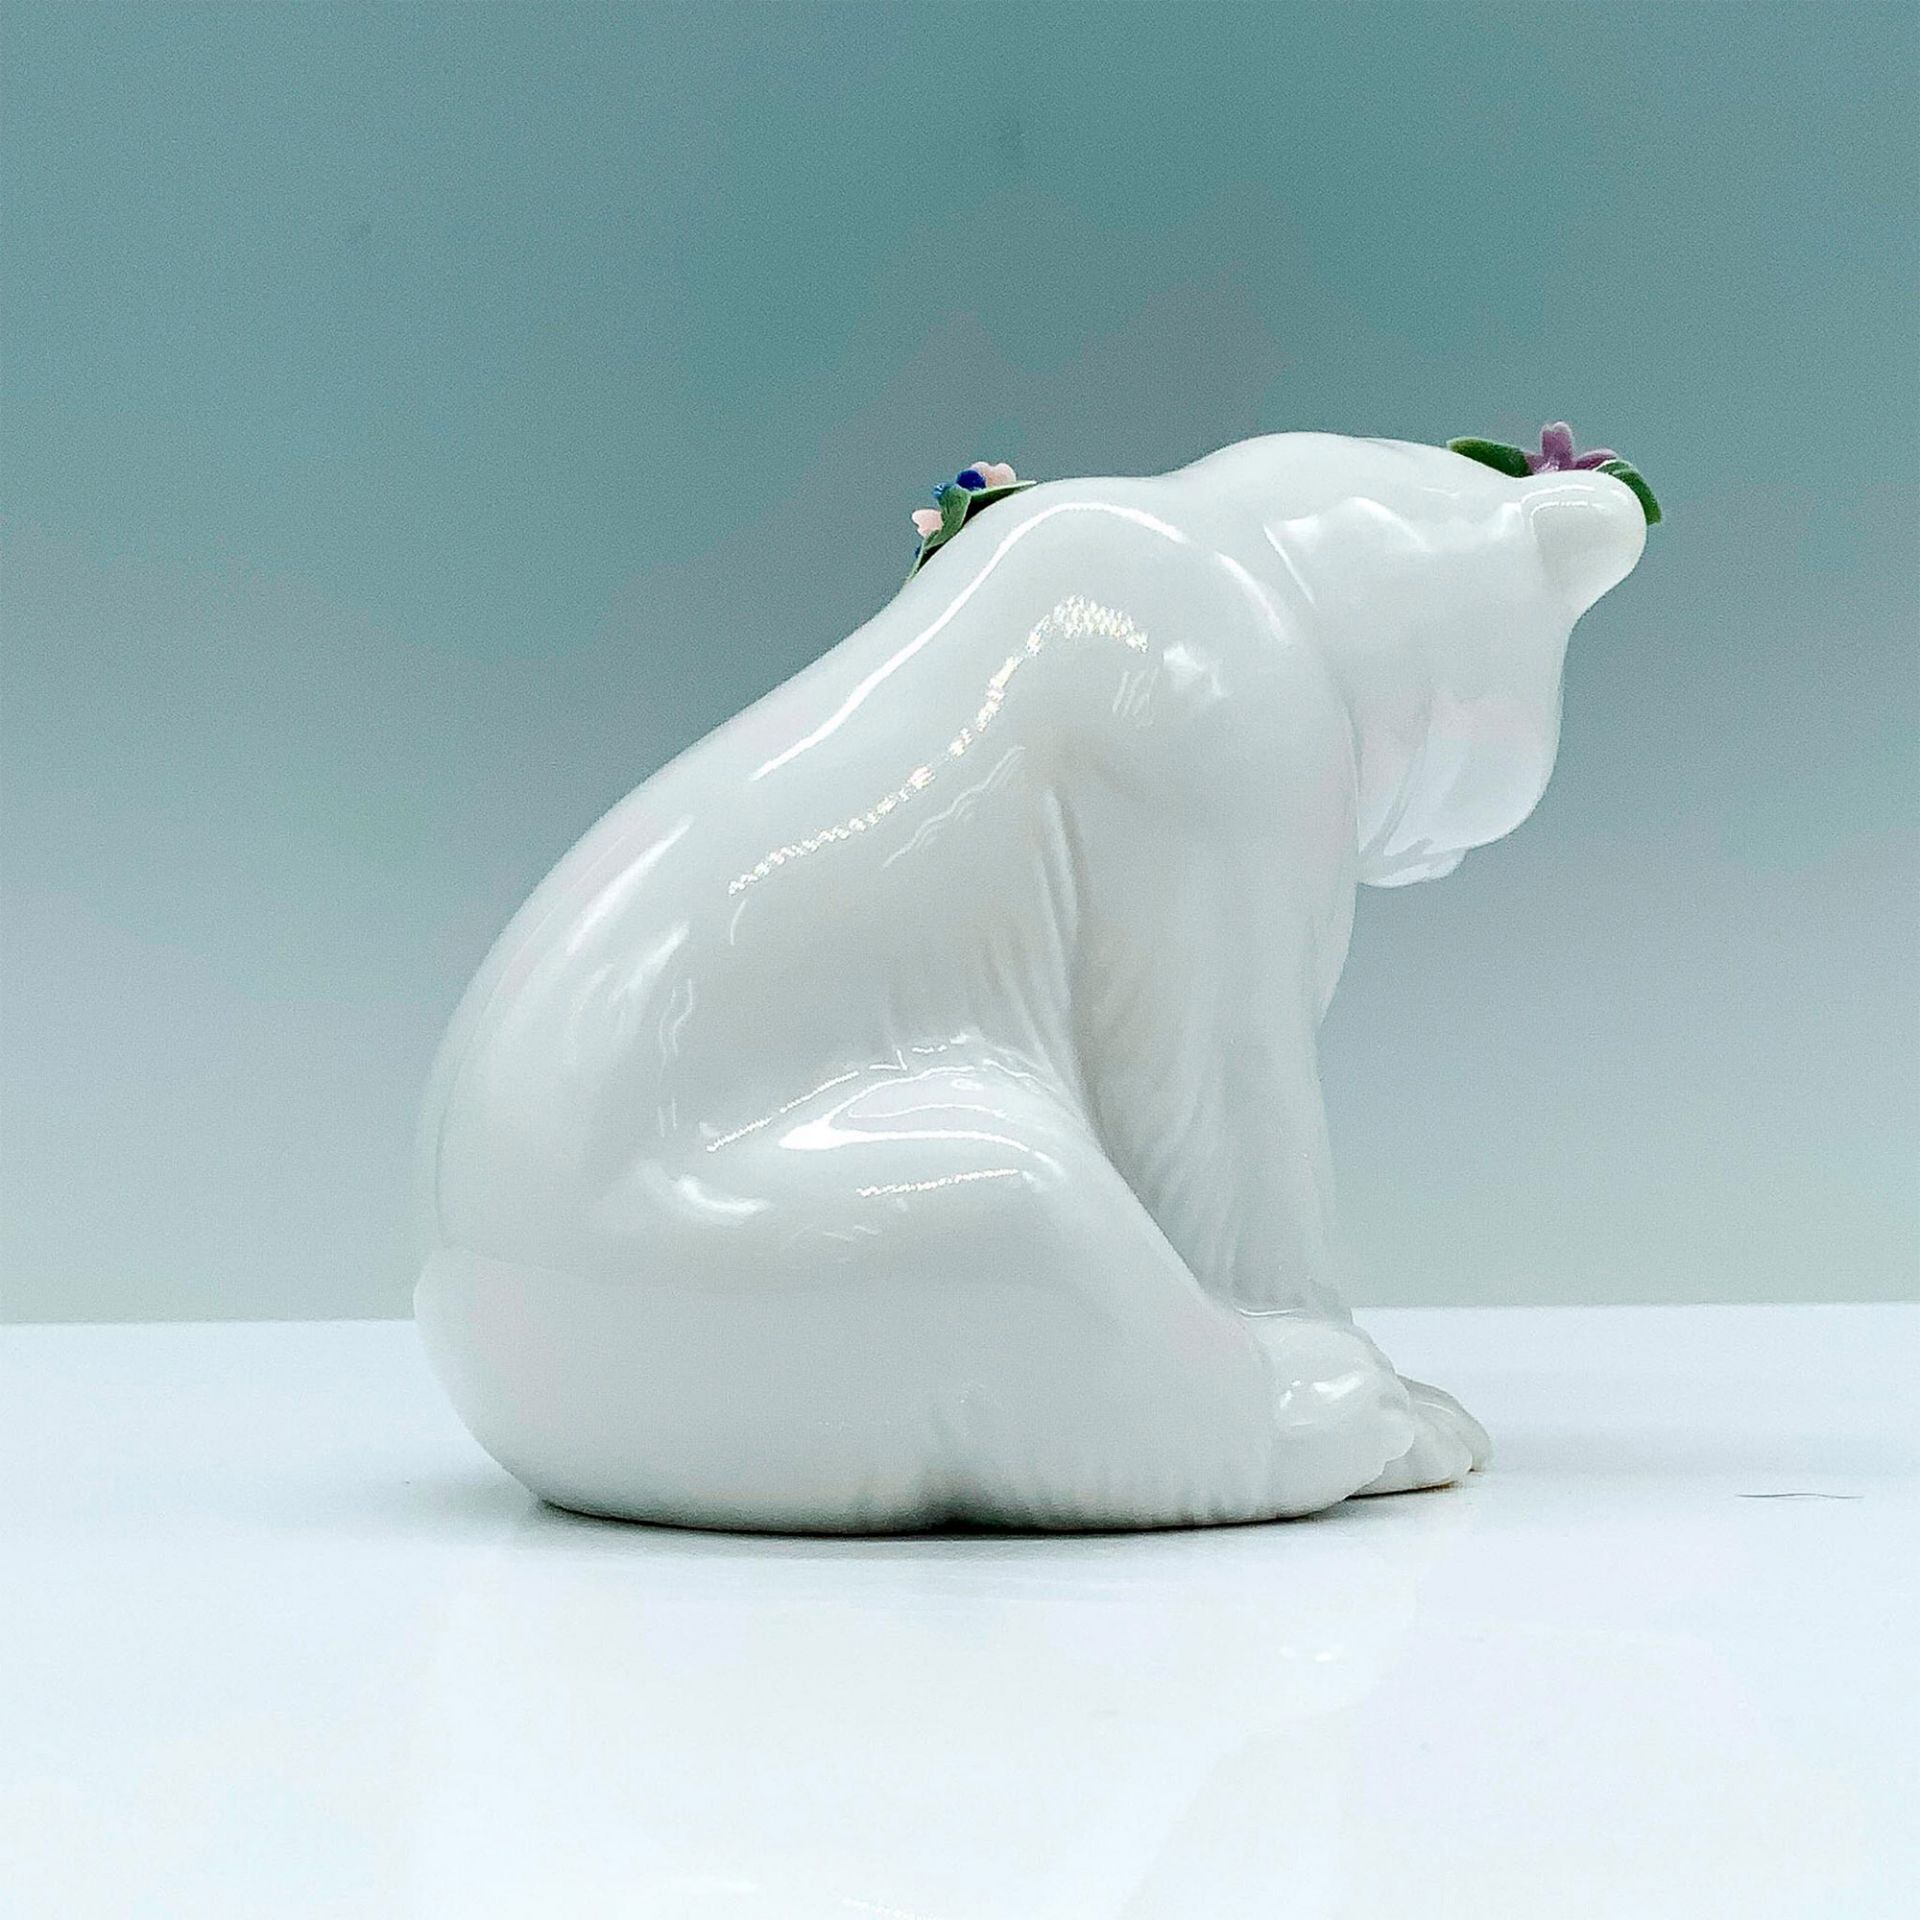 Polar Bear Seated With Flowers 1006356 - Lladro Porcelain Figurine - Image 2 of 3